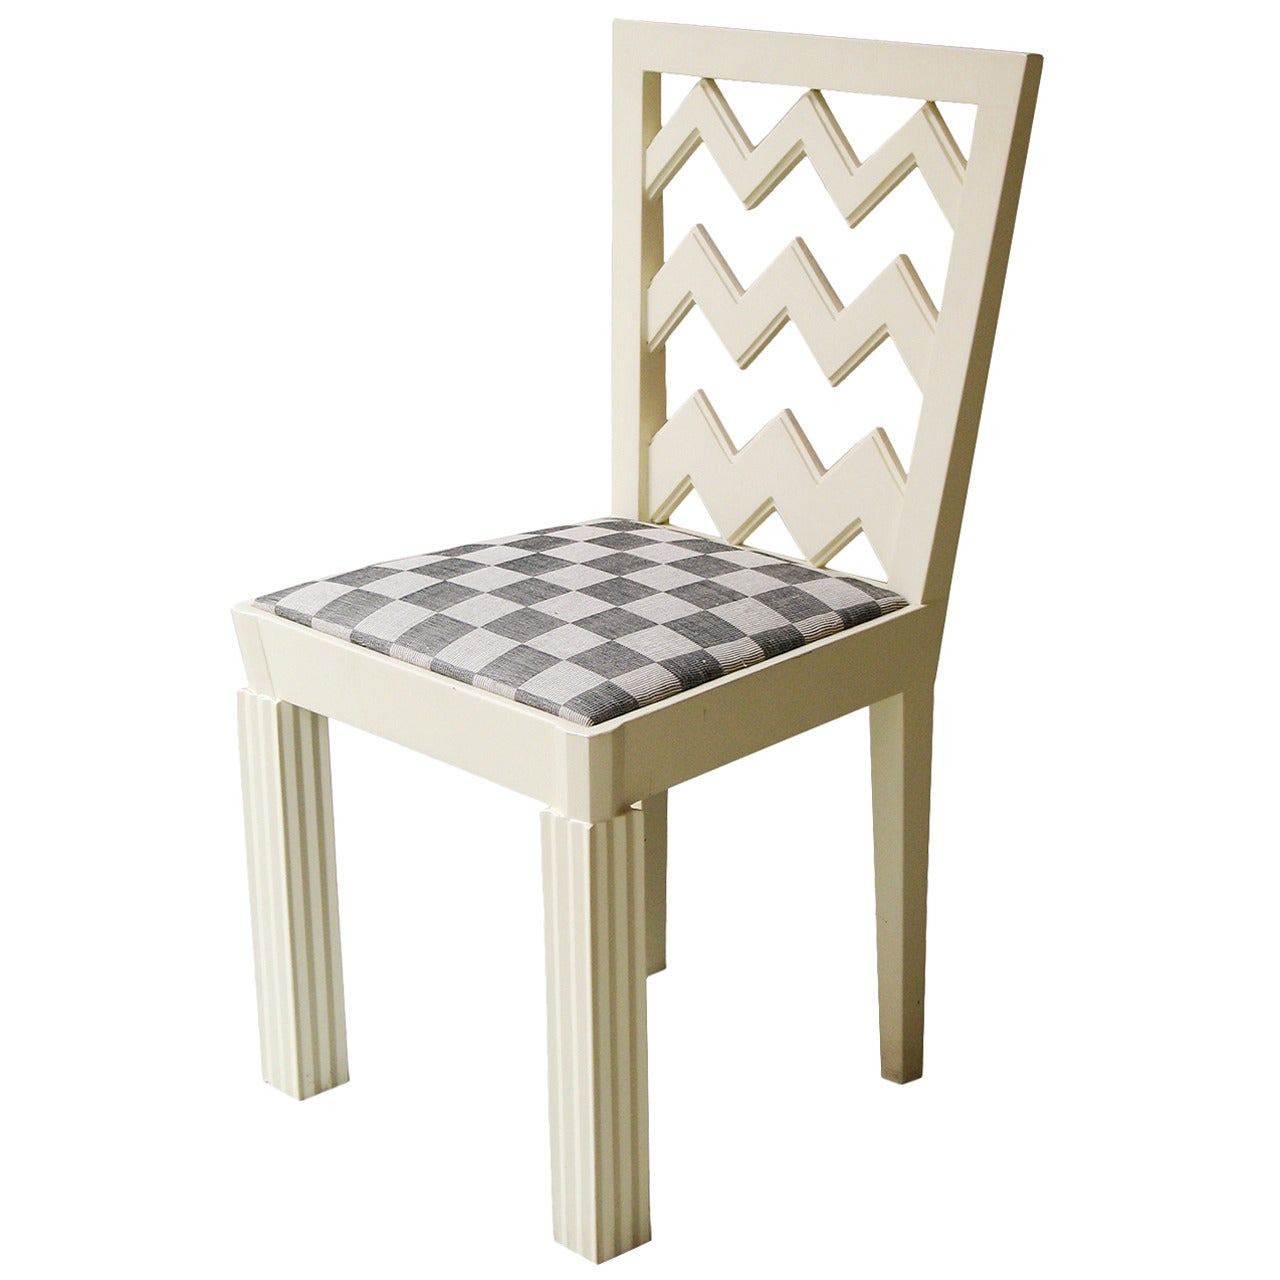 Josef Hoffmann Attributed Vienna Secession White Lacquered Chair, circa 1910 For Sale